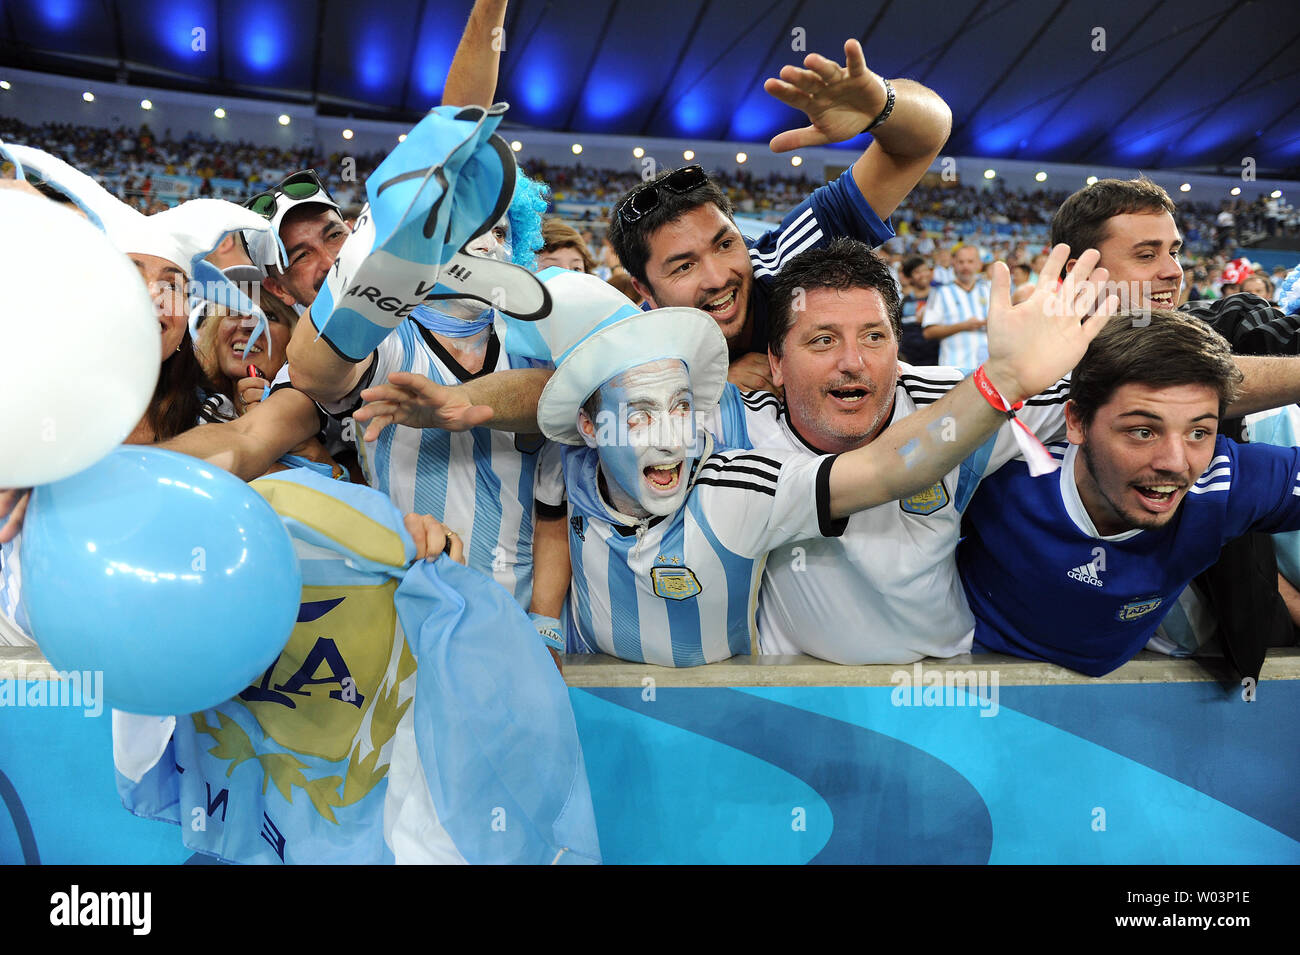 Argentina fans support their team during the 2014 FIFA World Cup Group F match at the Estadio do Maracana in Rio de Janeiro, Brazil on June 15, 2014. UPI/Chris Brunskill Stock Photo